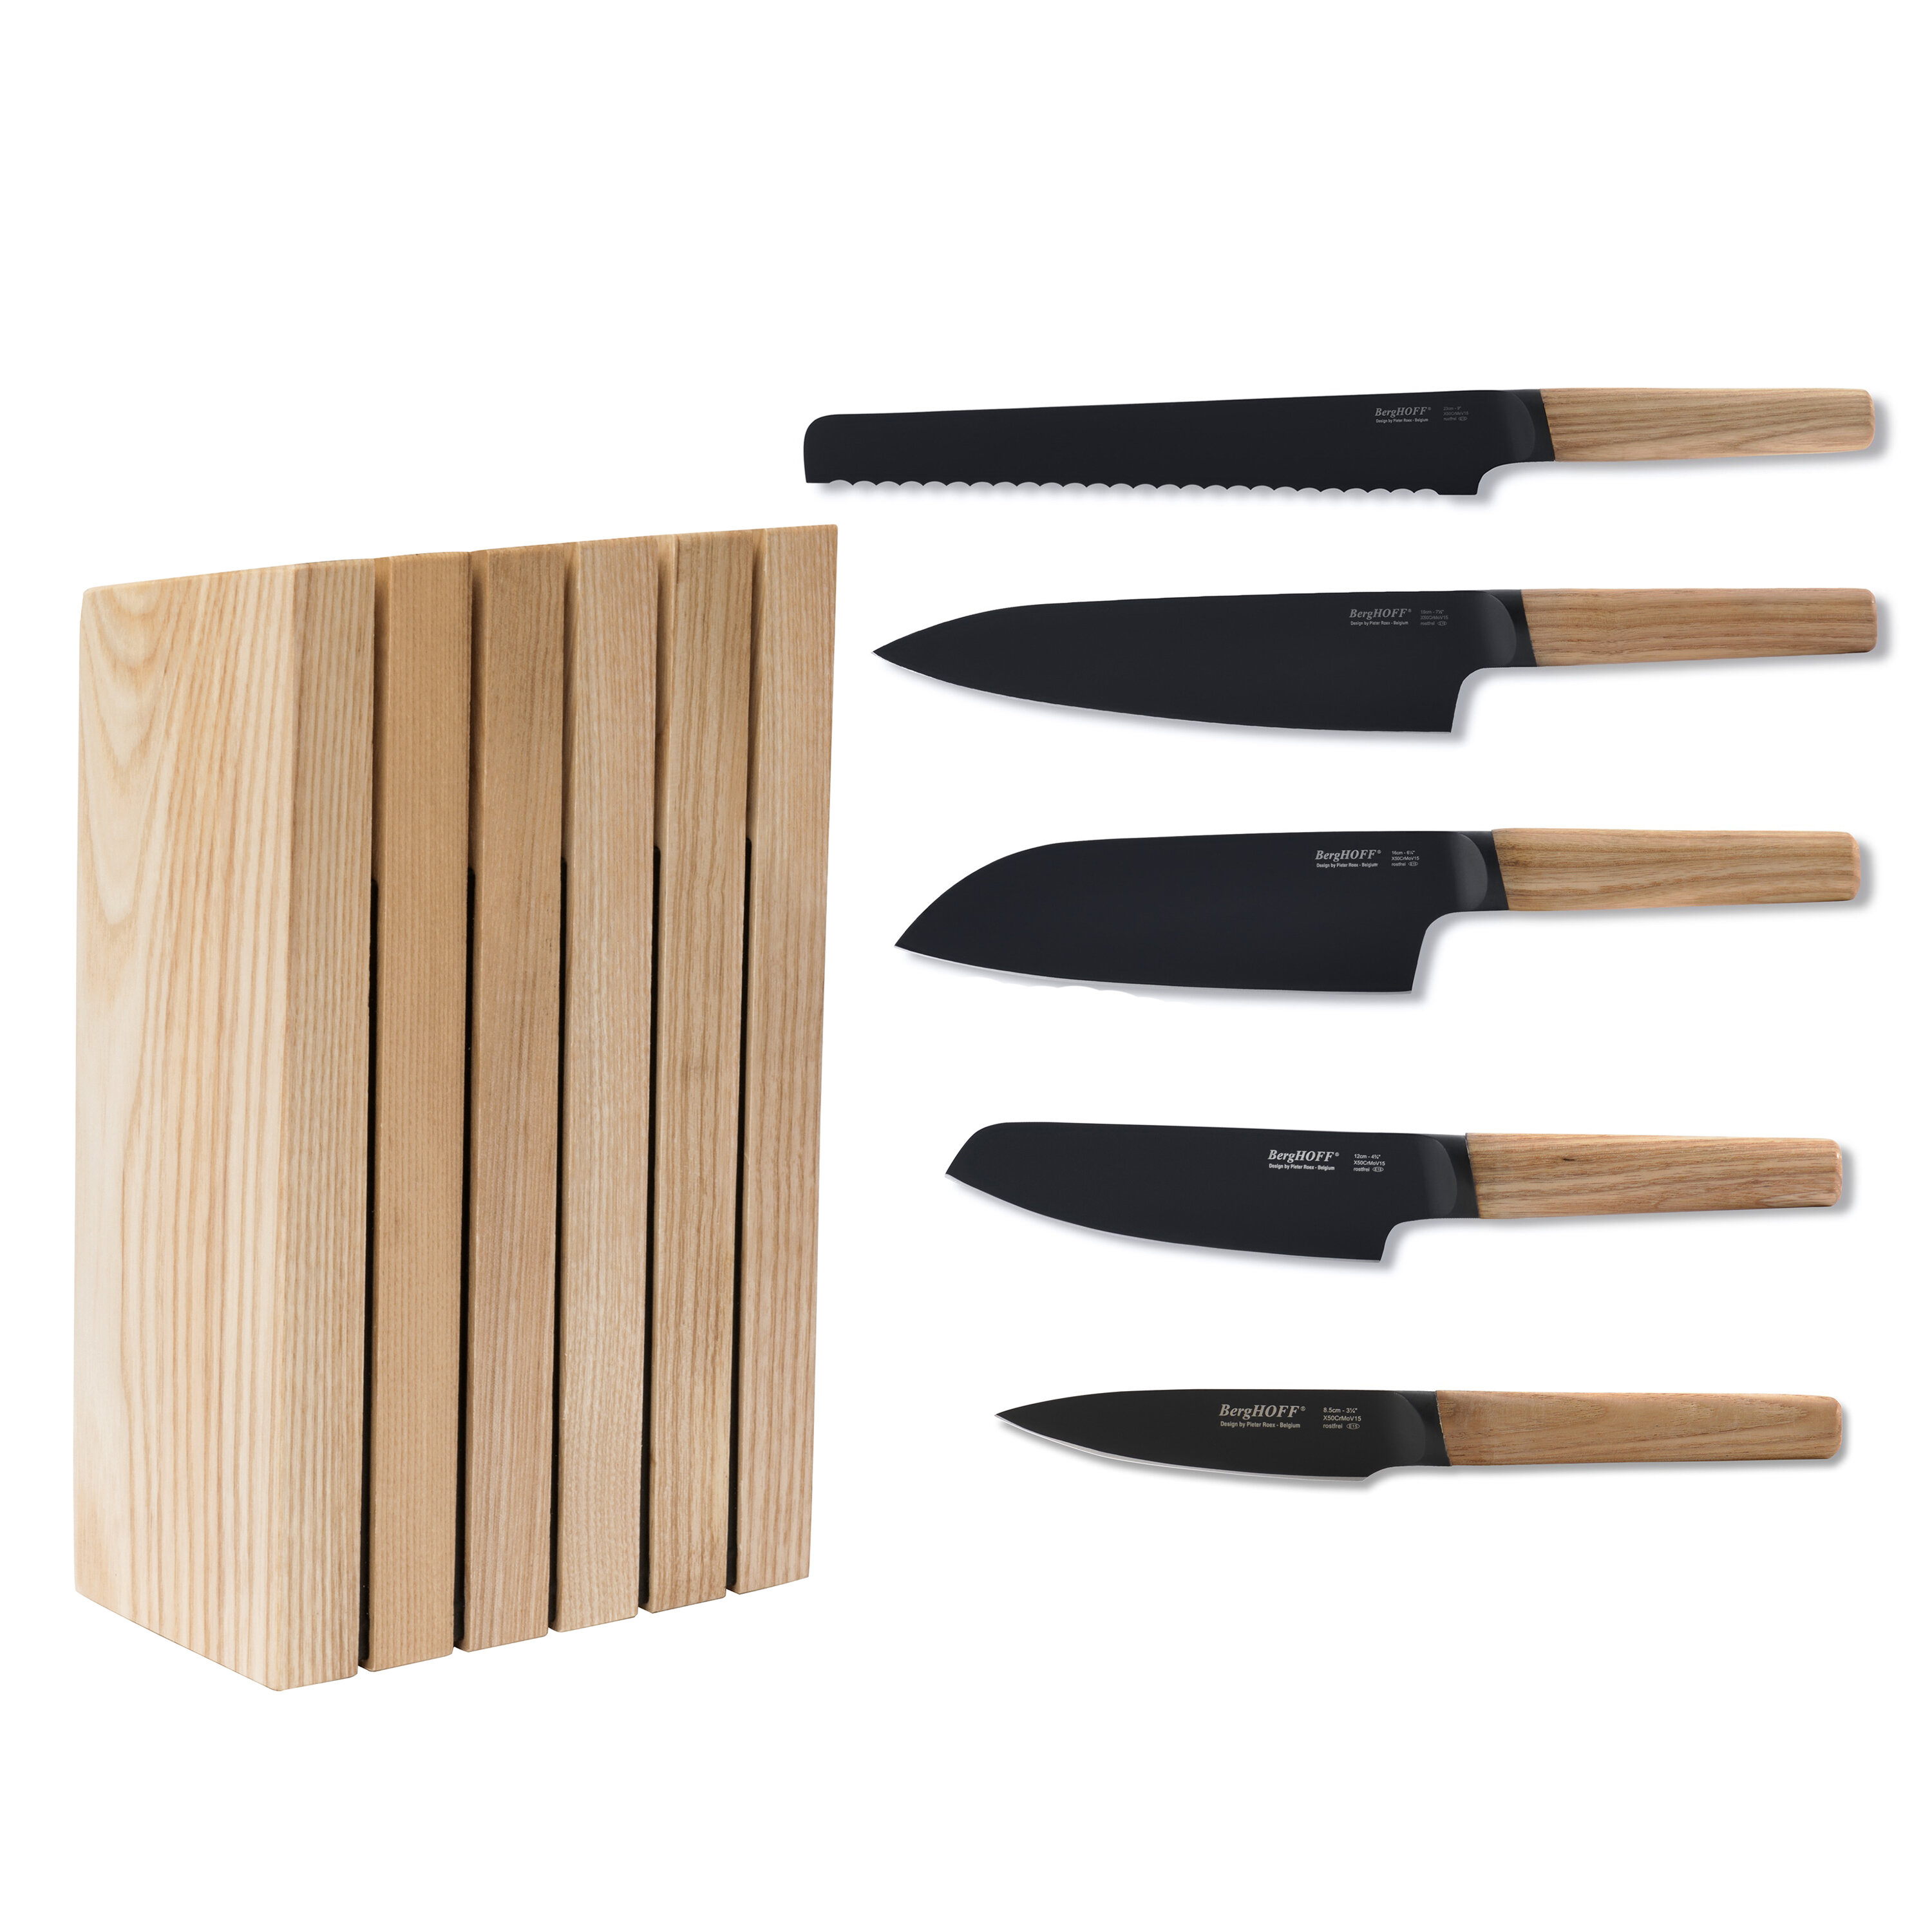 BergHOFF Ron 4 Pieces Knife Set With Ash Wood Natural Handle